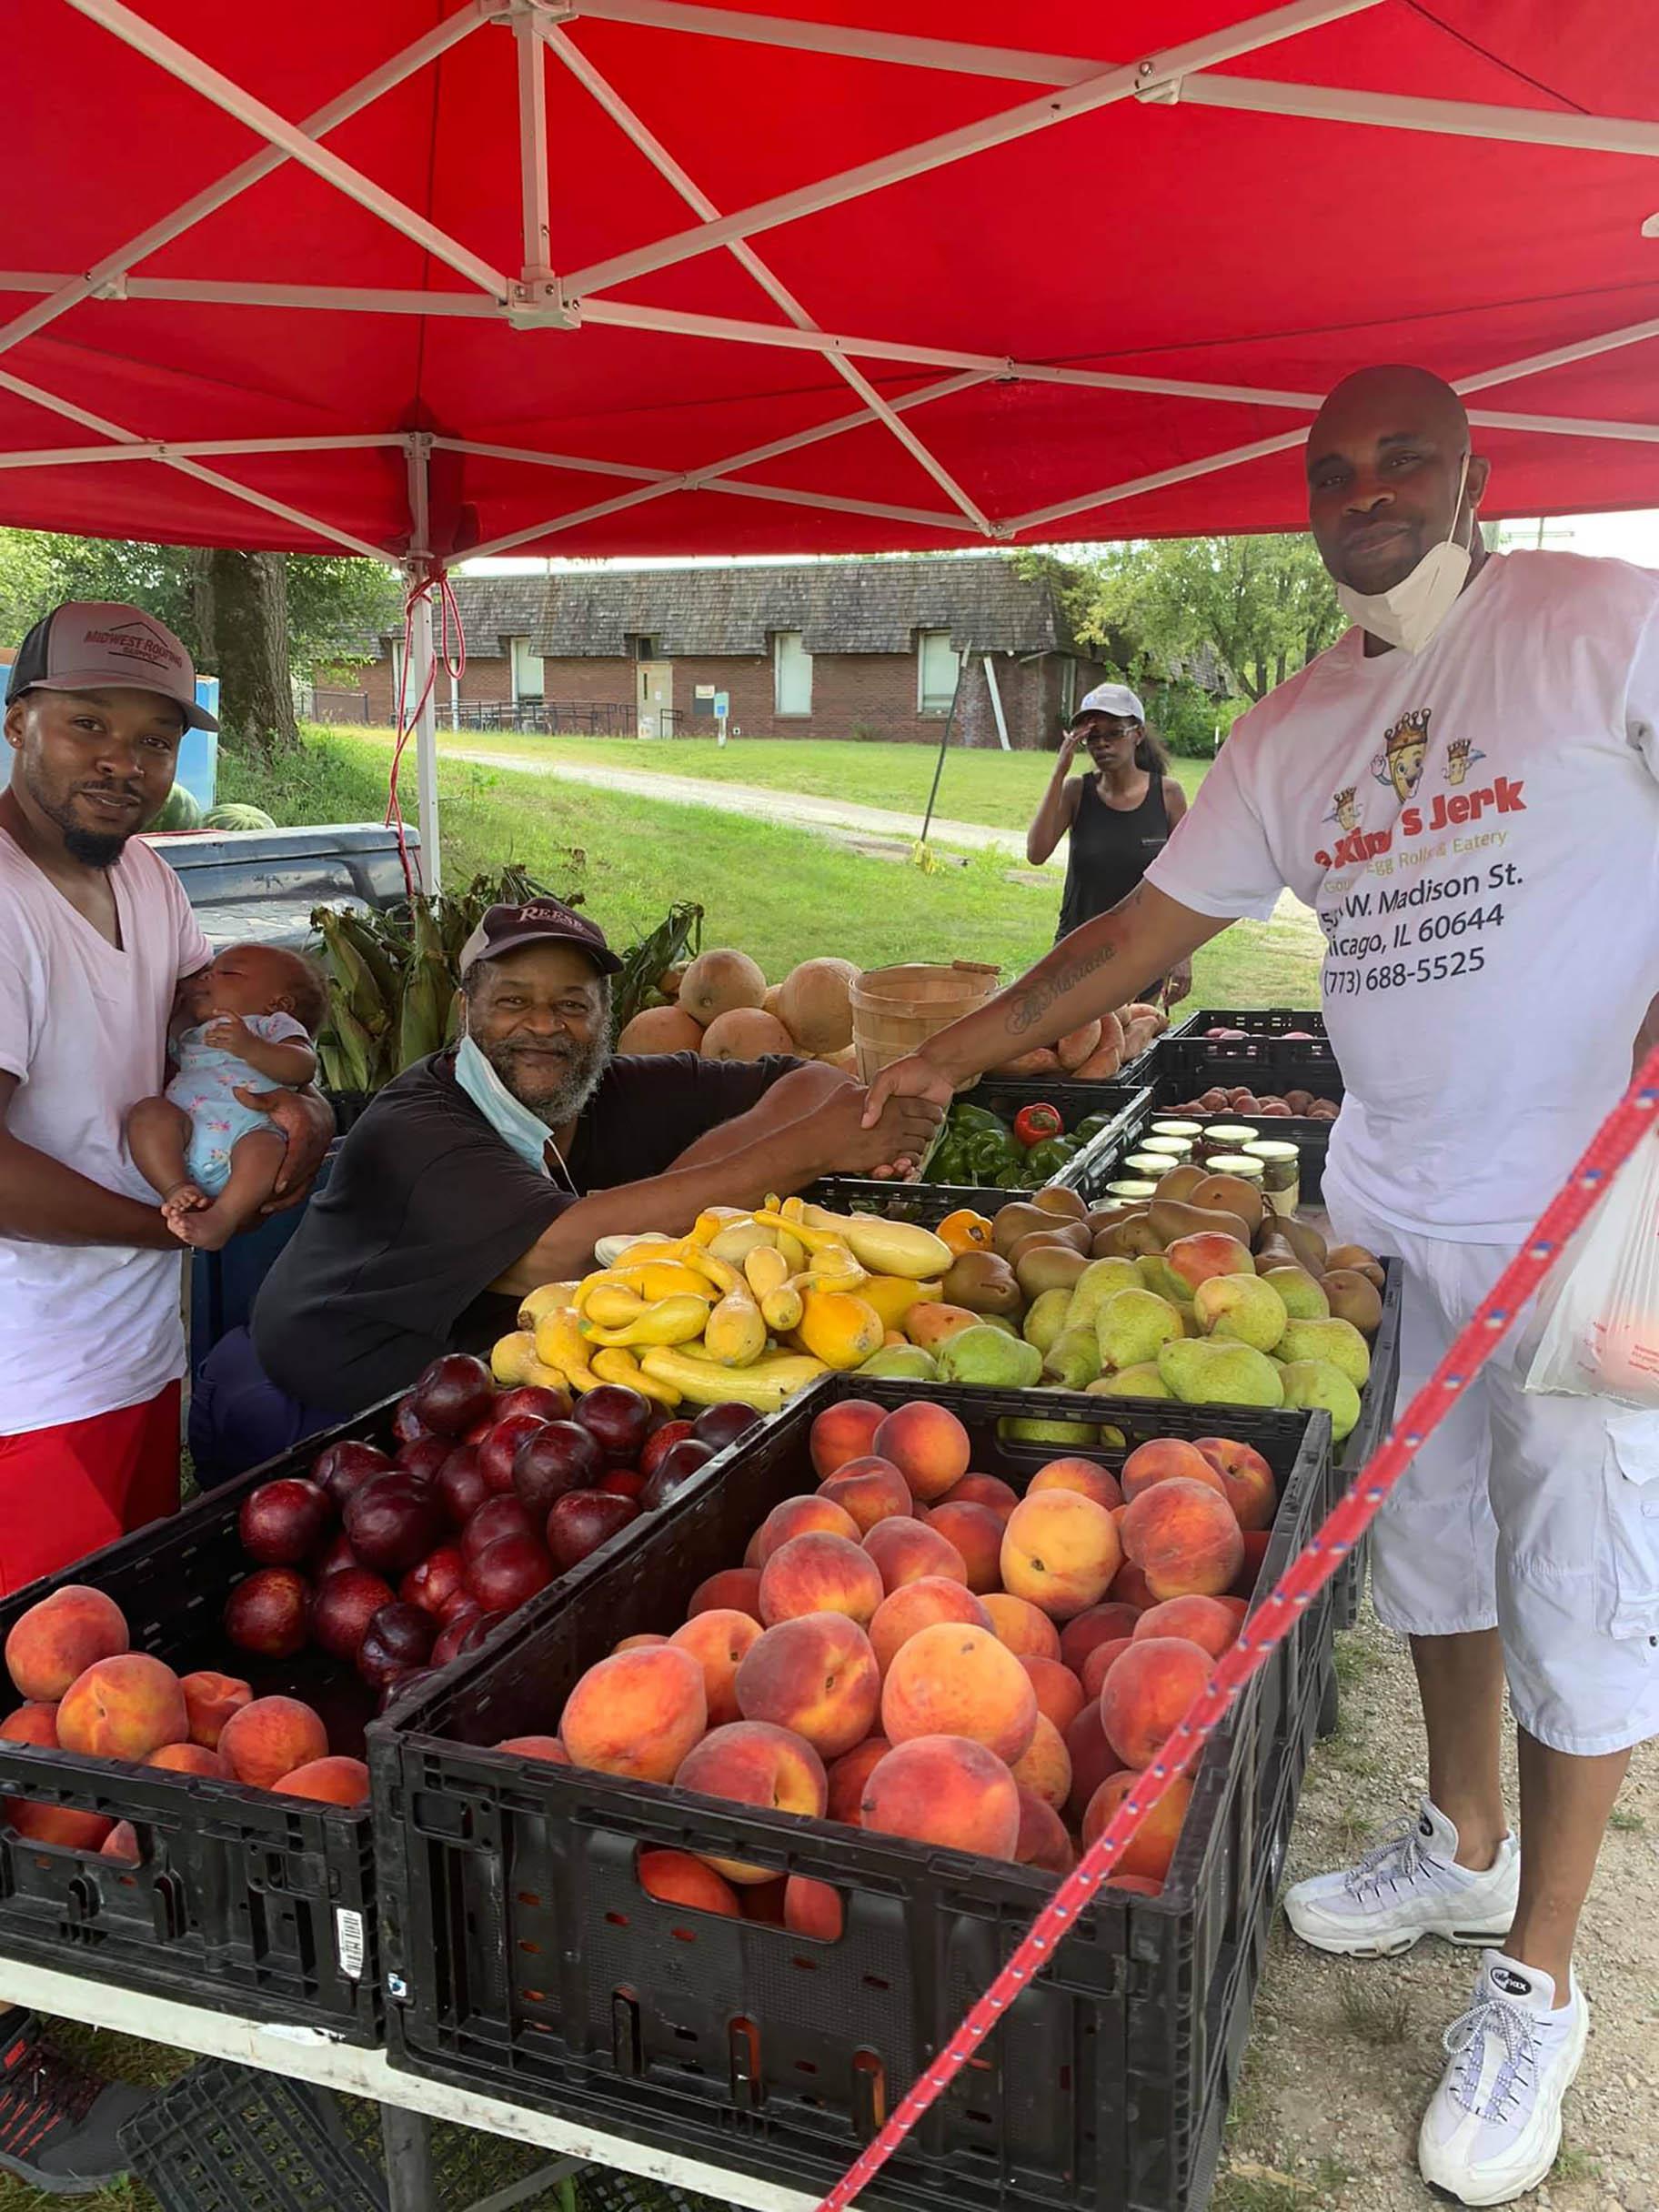 Albert Person meets with a farming family to pick up fresh produce in Kankakee, IL. (Courtesy: Albert Person)